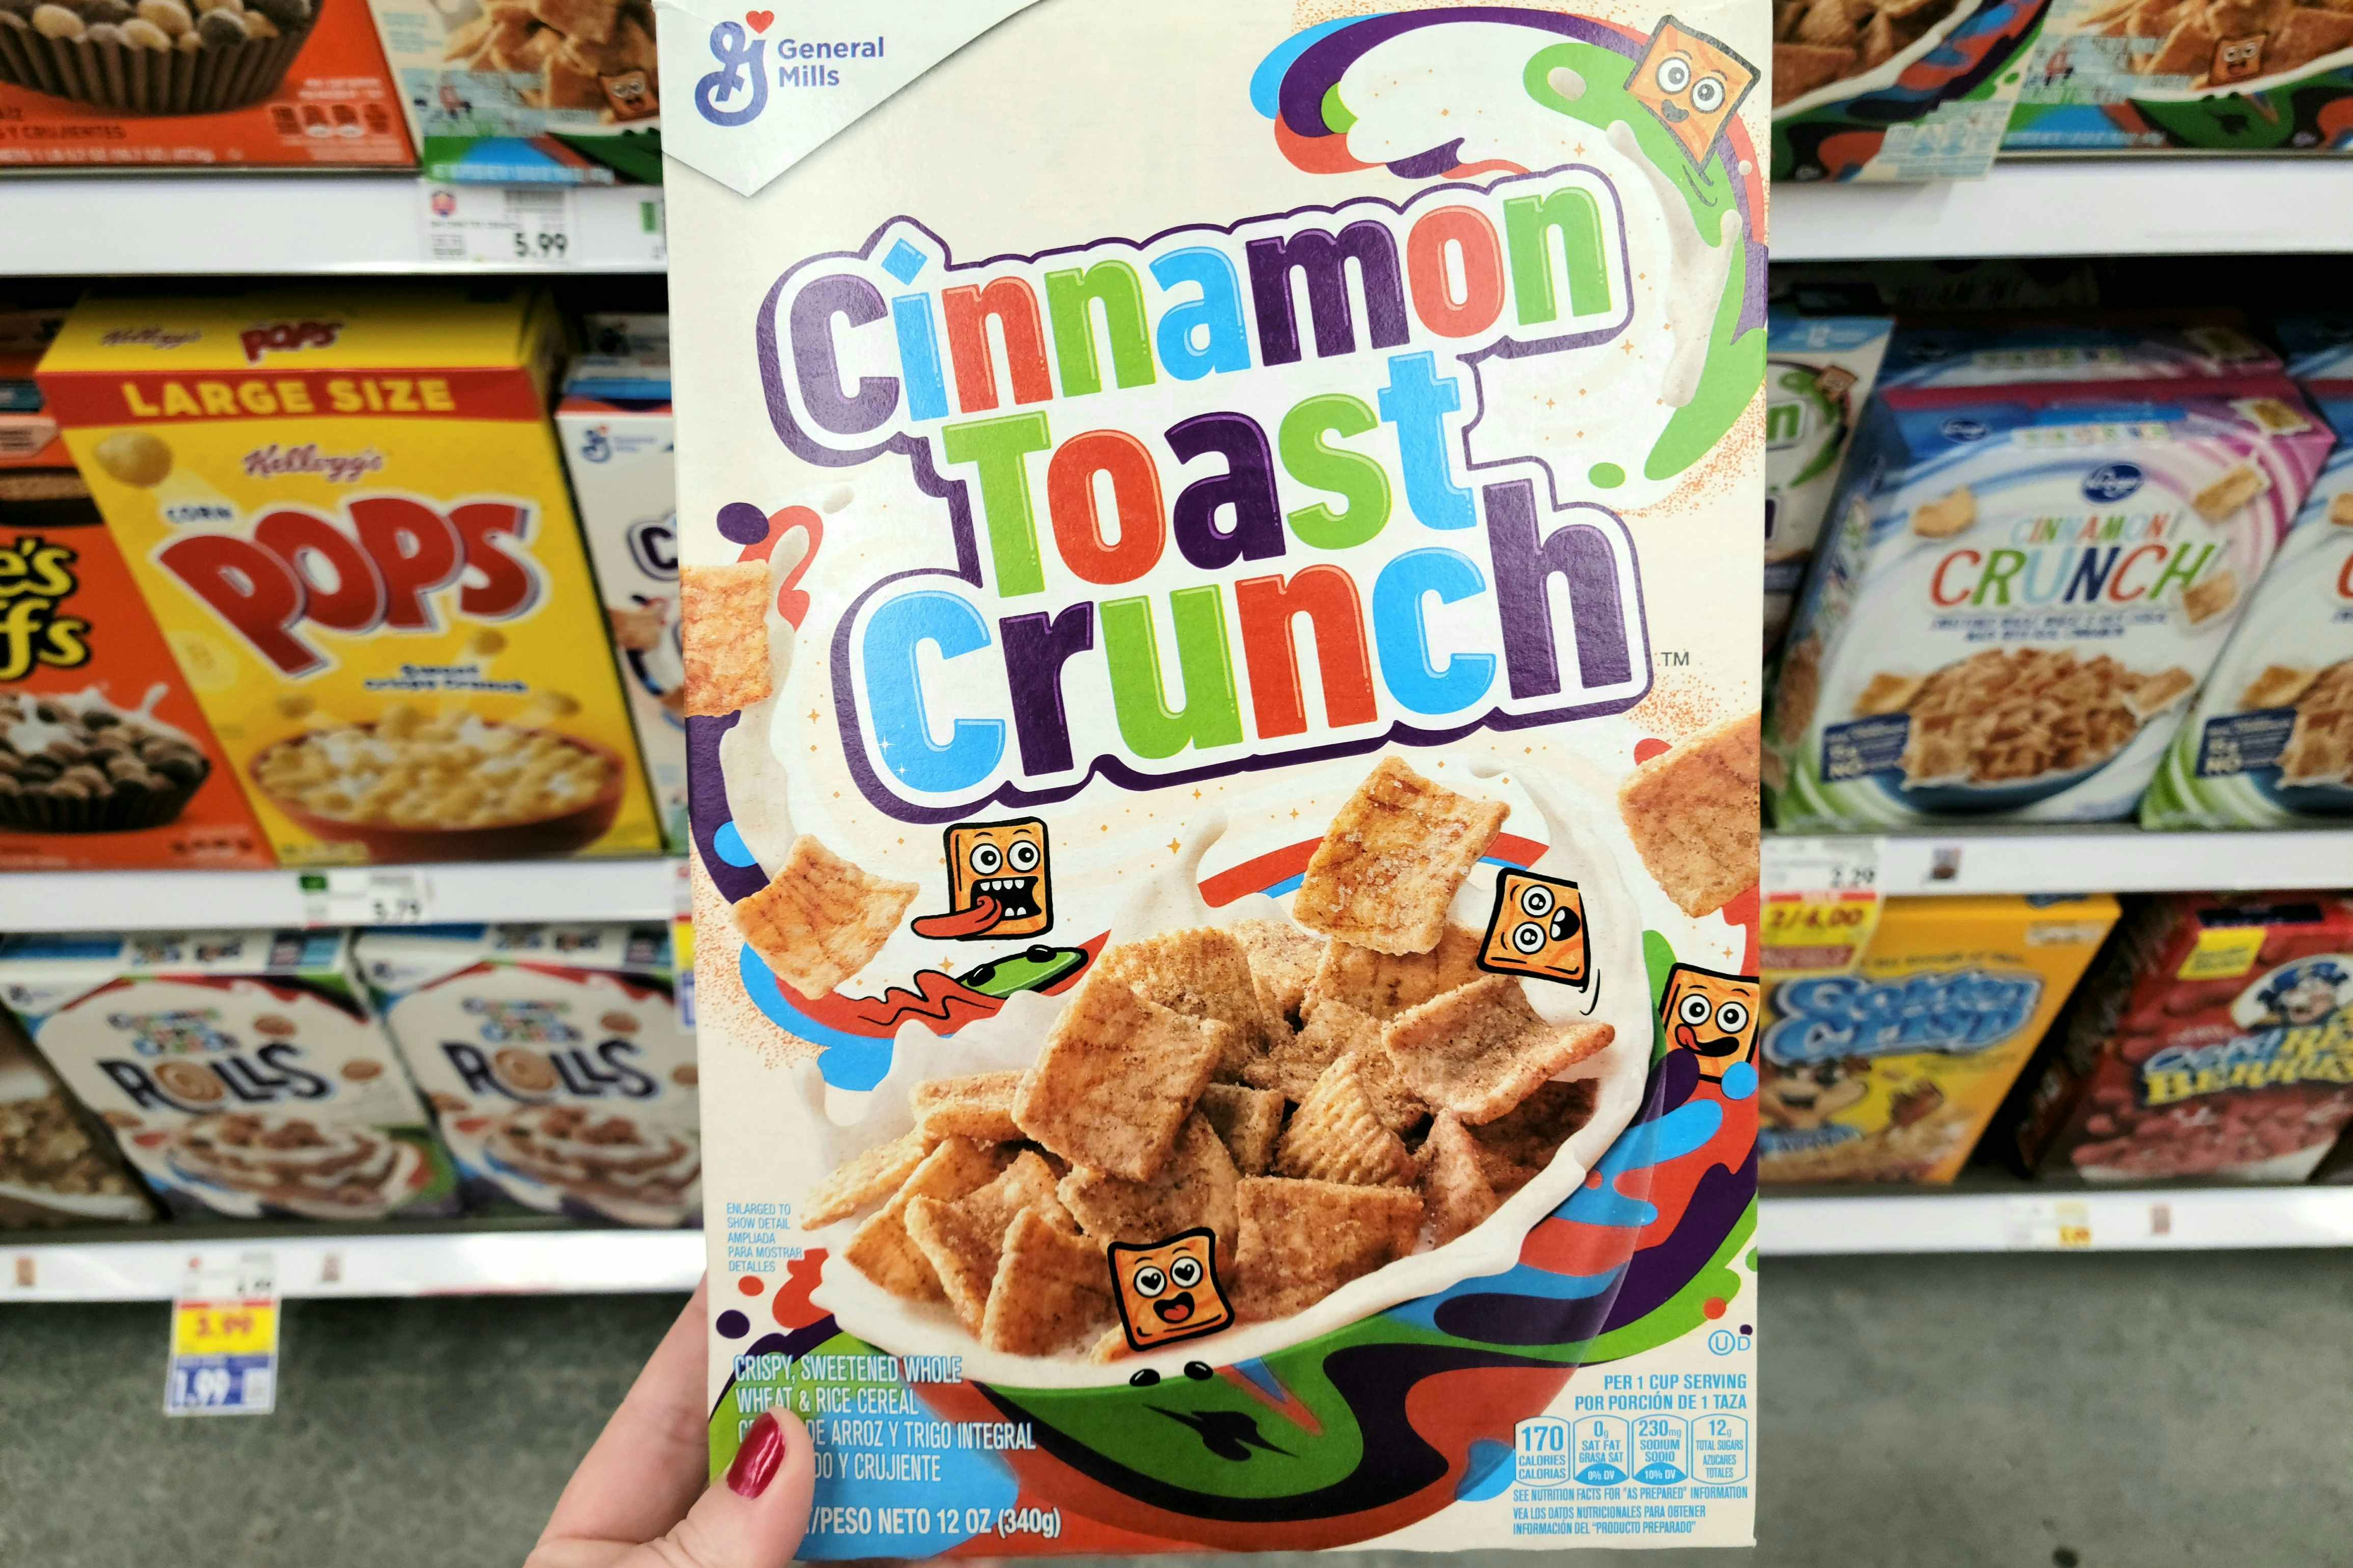 Cinnamon Toast Crunch Cereal, as Low as $1.49 on Amazon